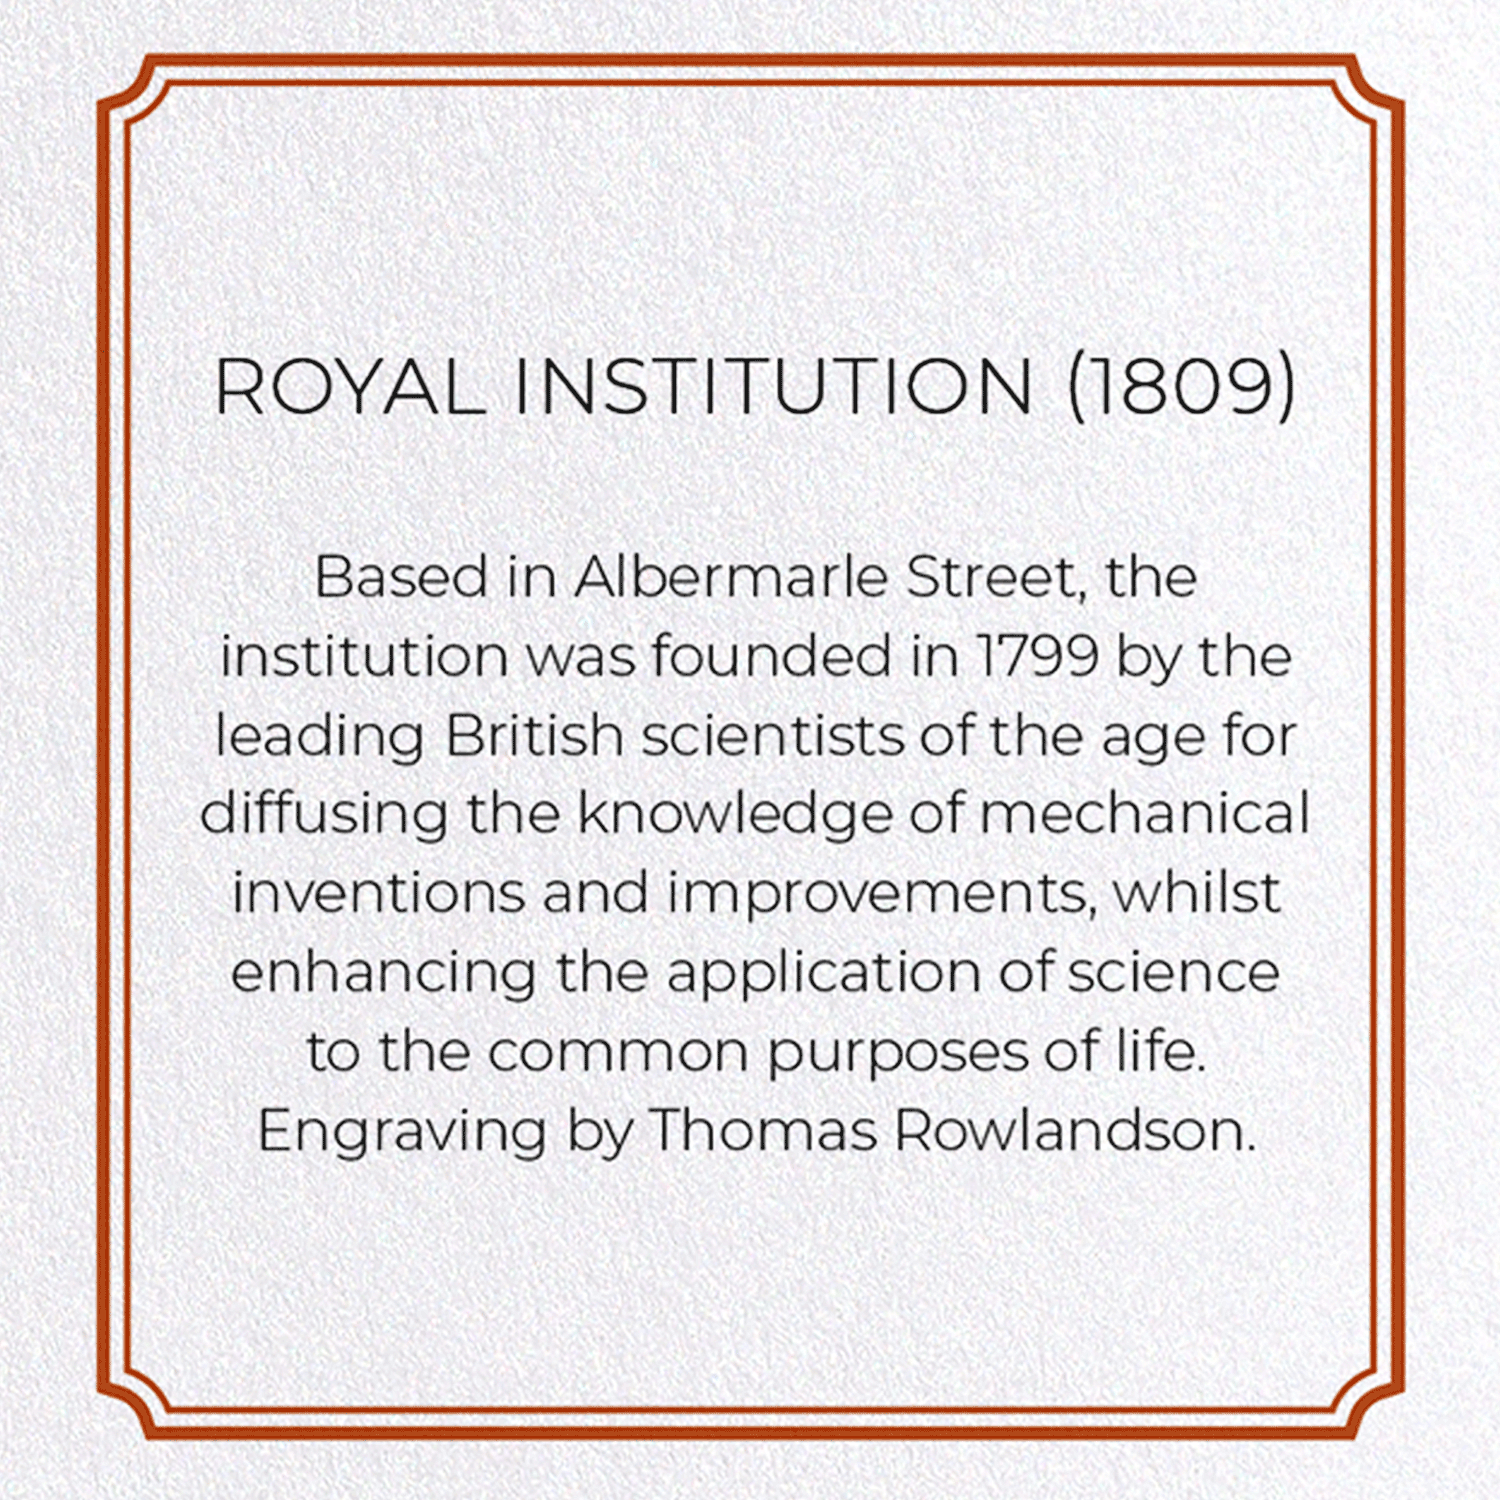 ROYAL INSTITUTION (1809)